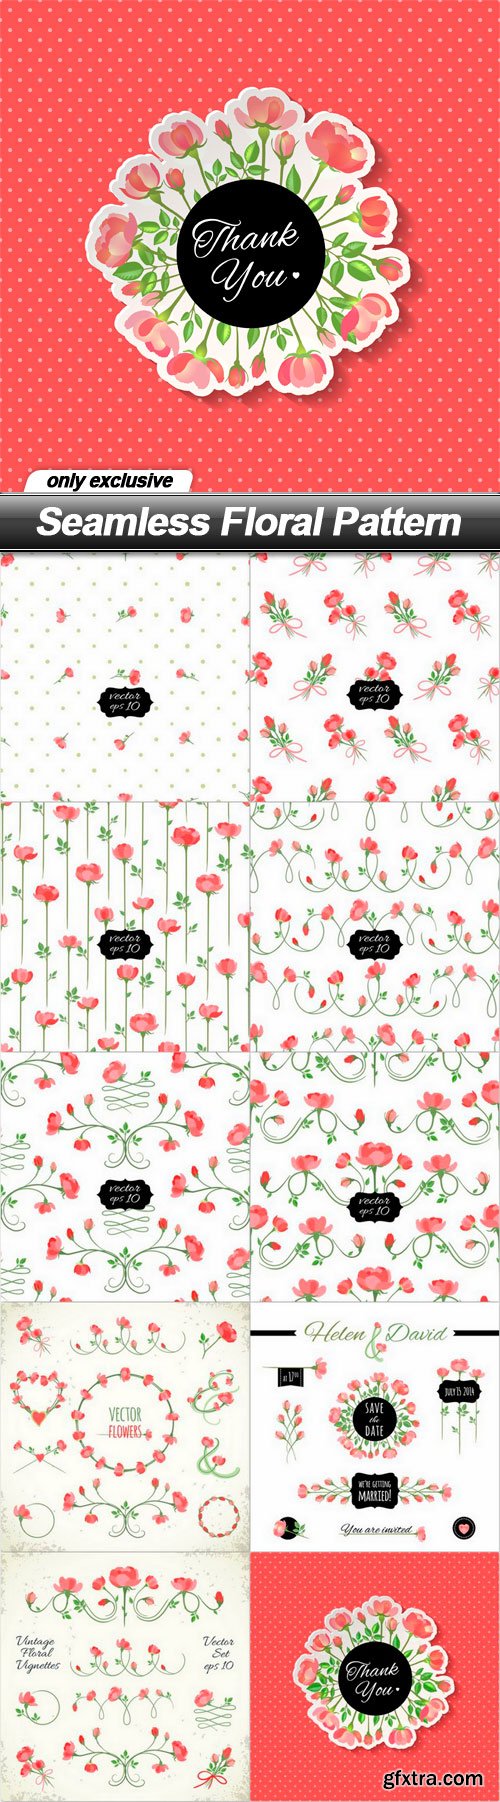 Seamless Floral Pattern - 10 EPS